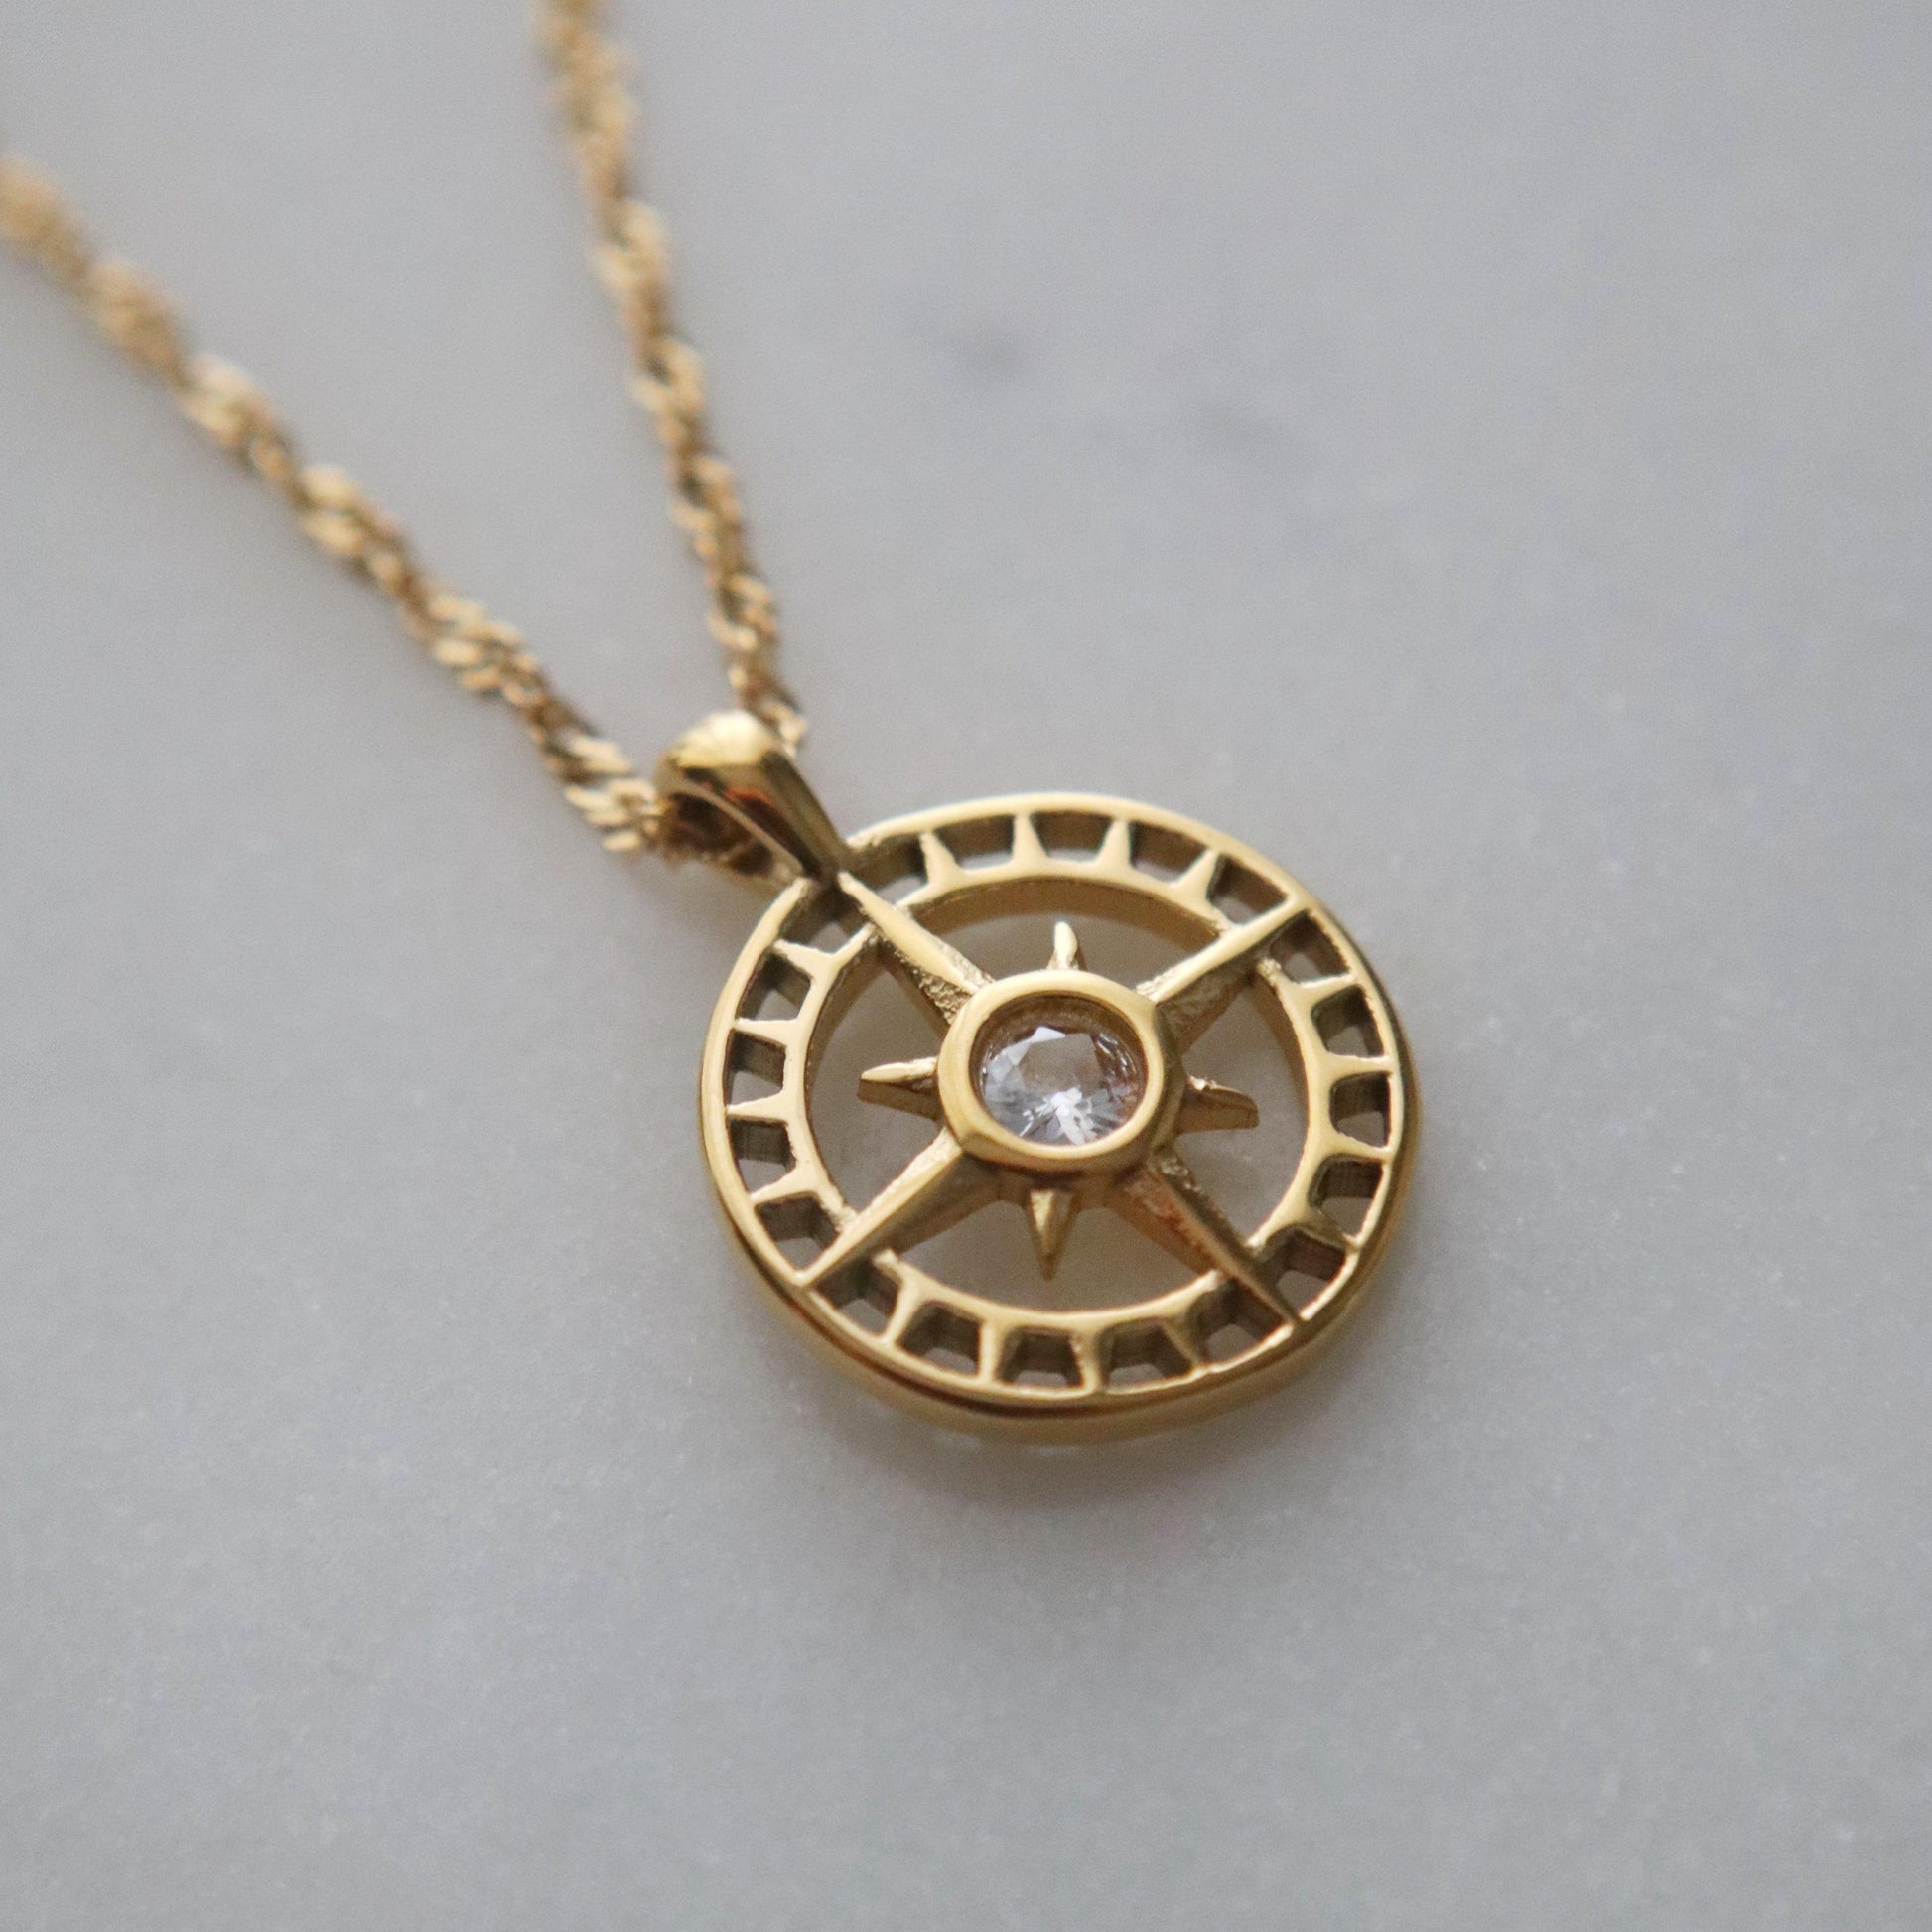 Compass Necklace | Pendant Necklace - JESSA JEWELRY | GOLD JEWELRY; dainty, affordable gold everyday jewelry. Tarnish free, water-resistant, hypoallergenic. Jewelry for everyday wear